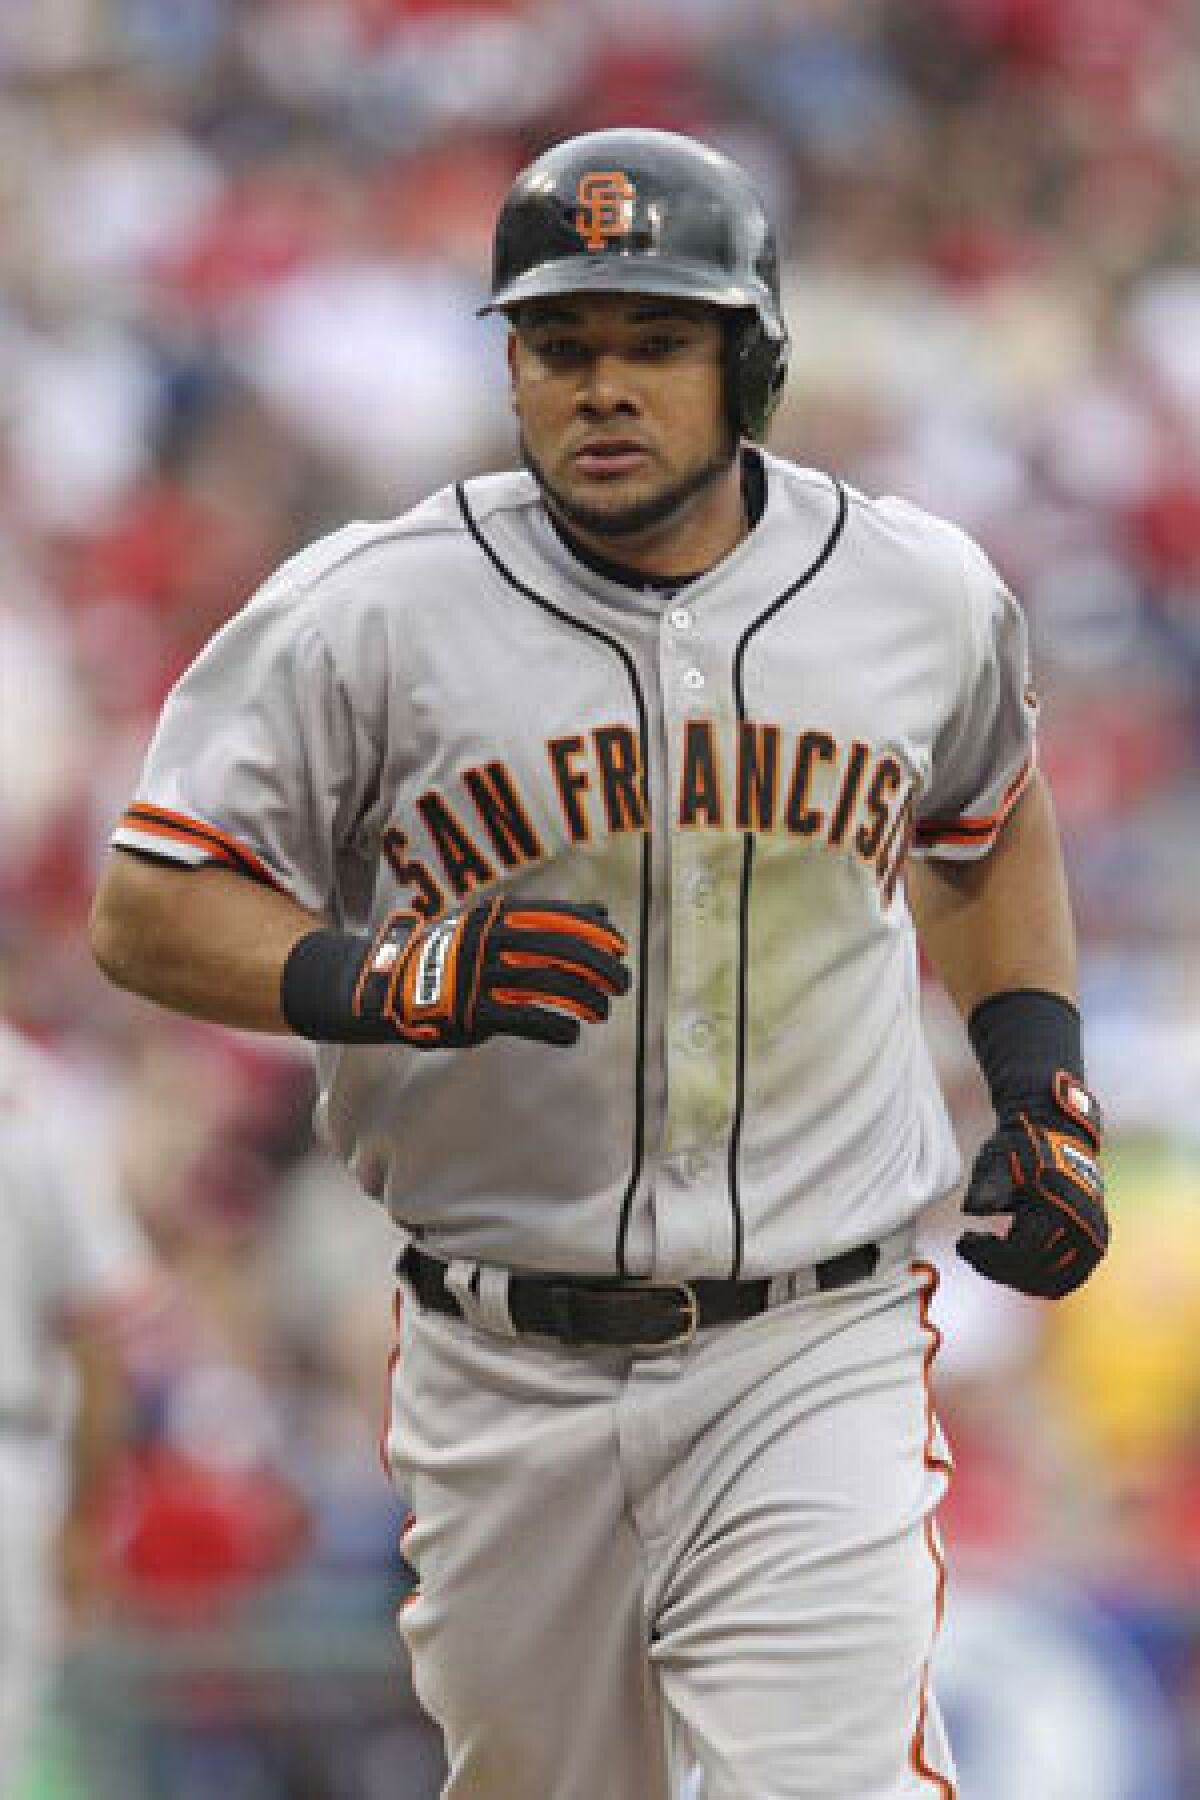 Melky Cabrera was suspended for 50 games last season for testing positive for testosterone.